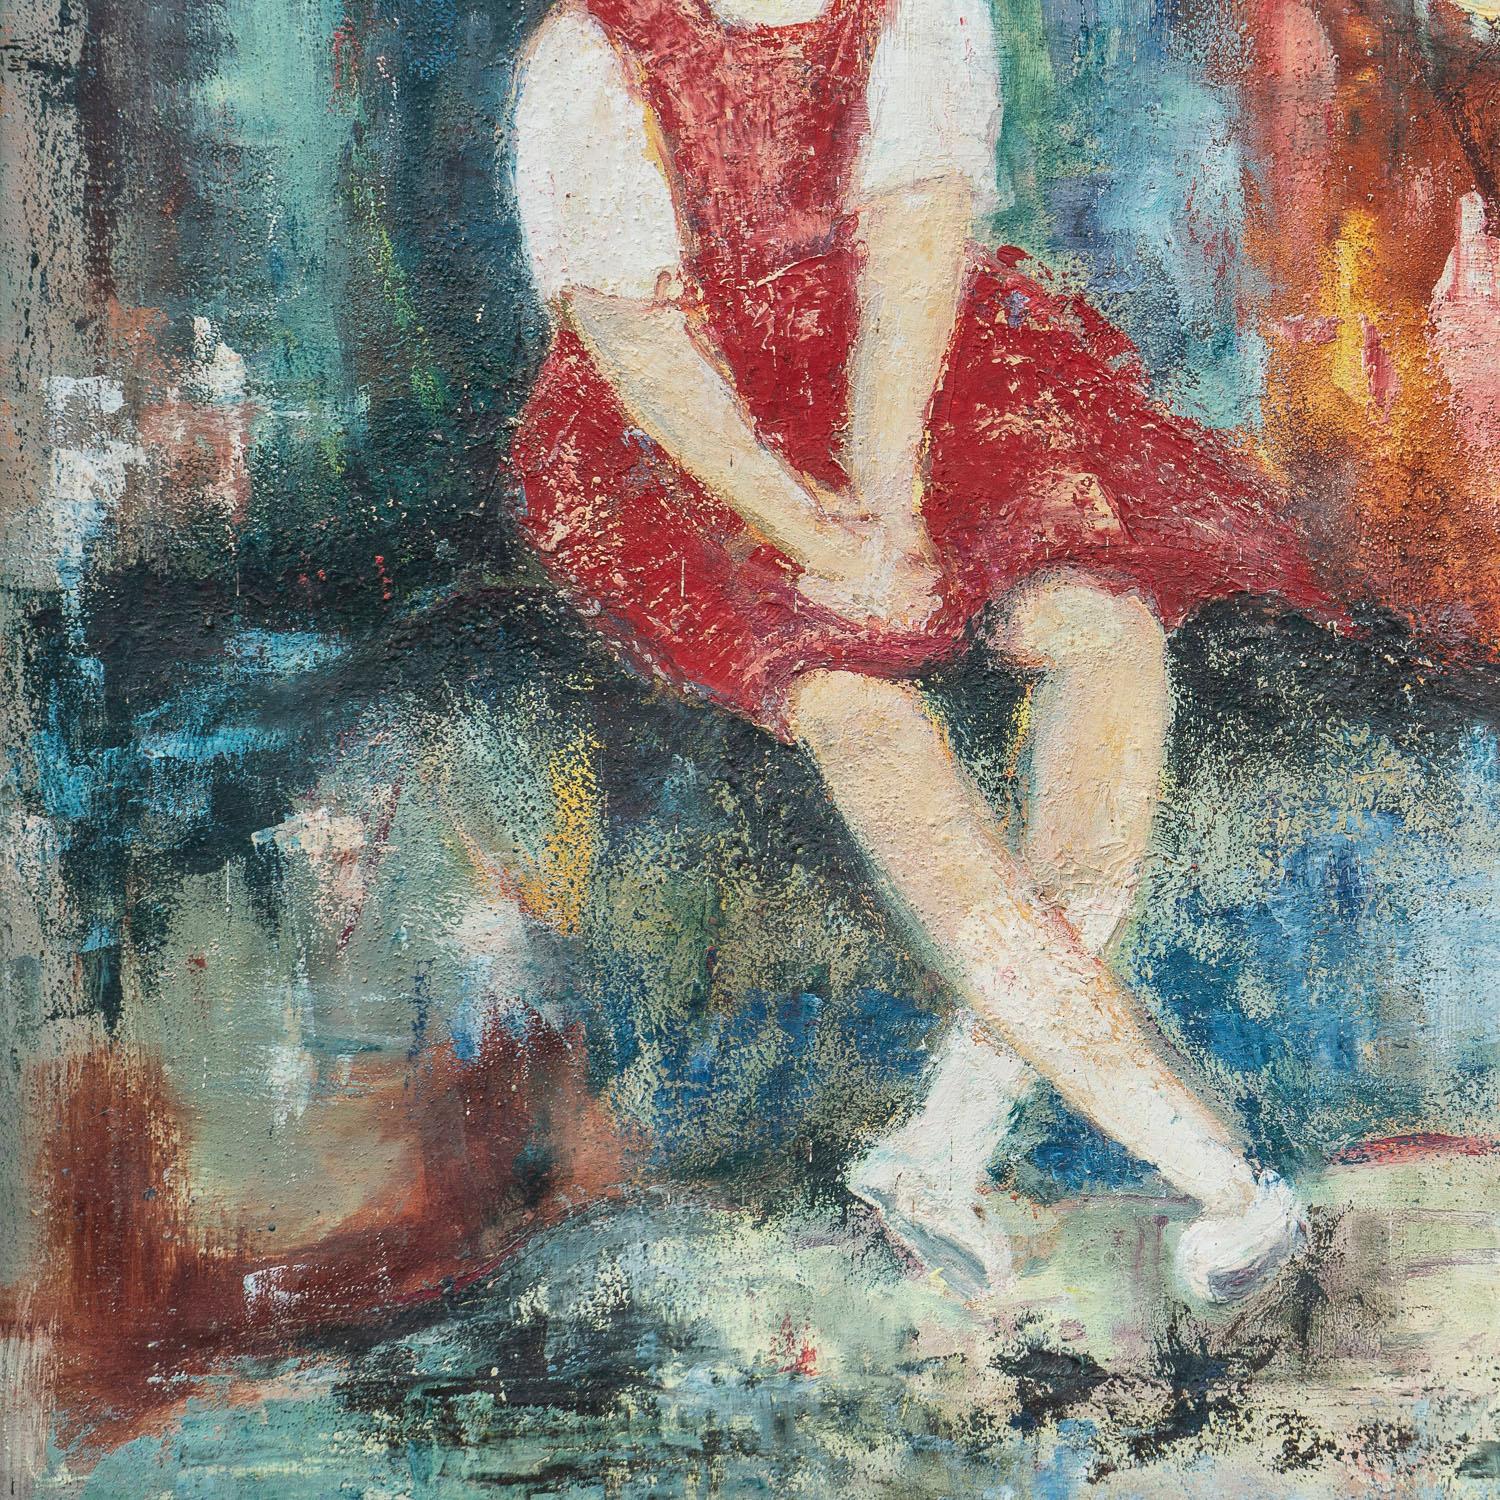 Hand-Painted Expressionist Portrait of a Girl with a Bird Cage, Original Vintage Oil. C.1950s For Sale